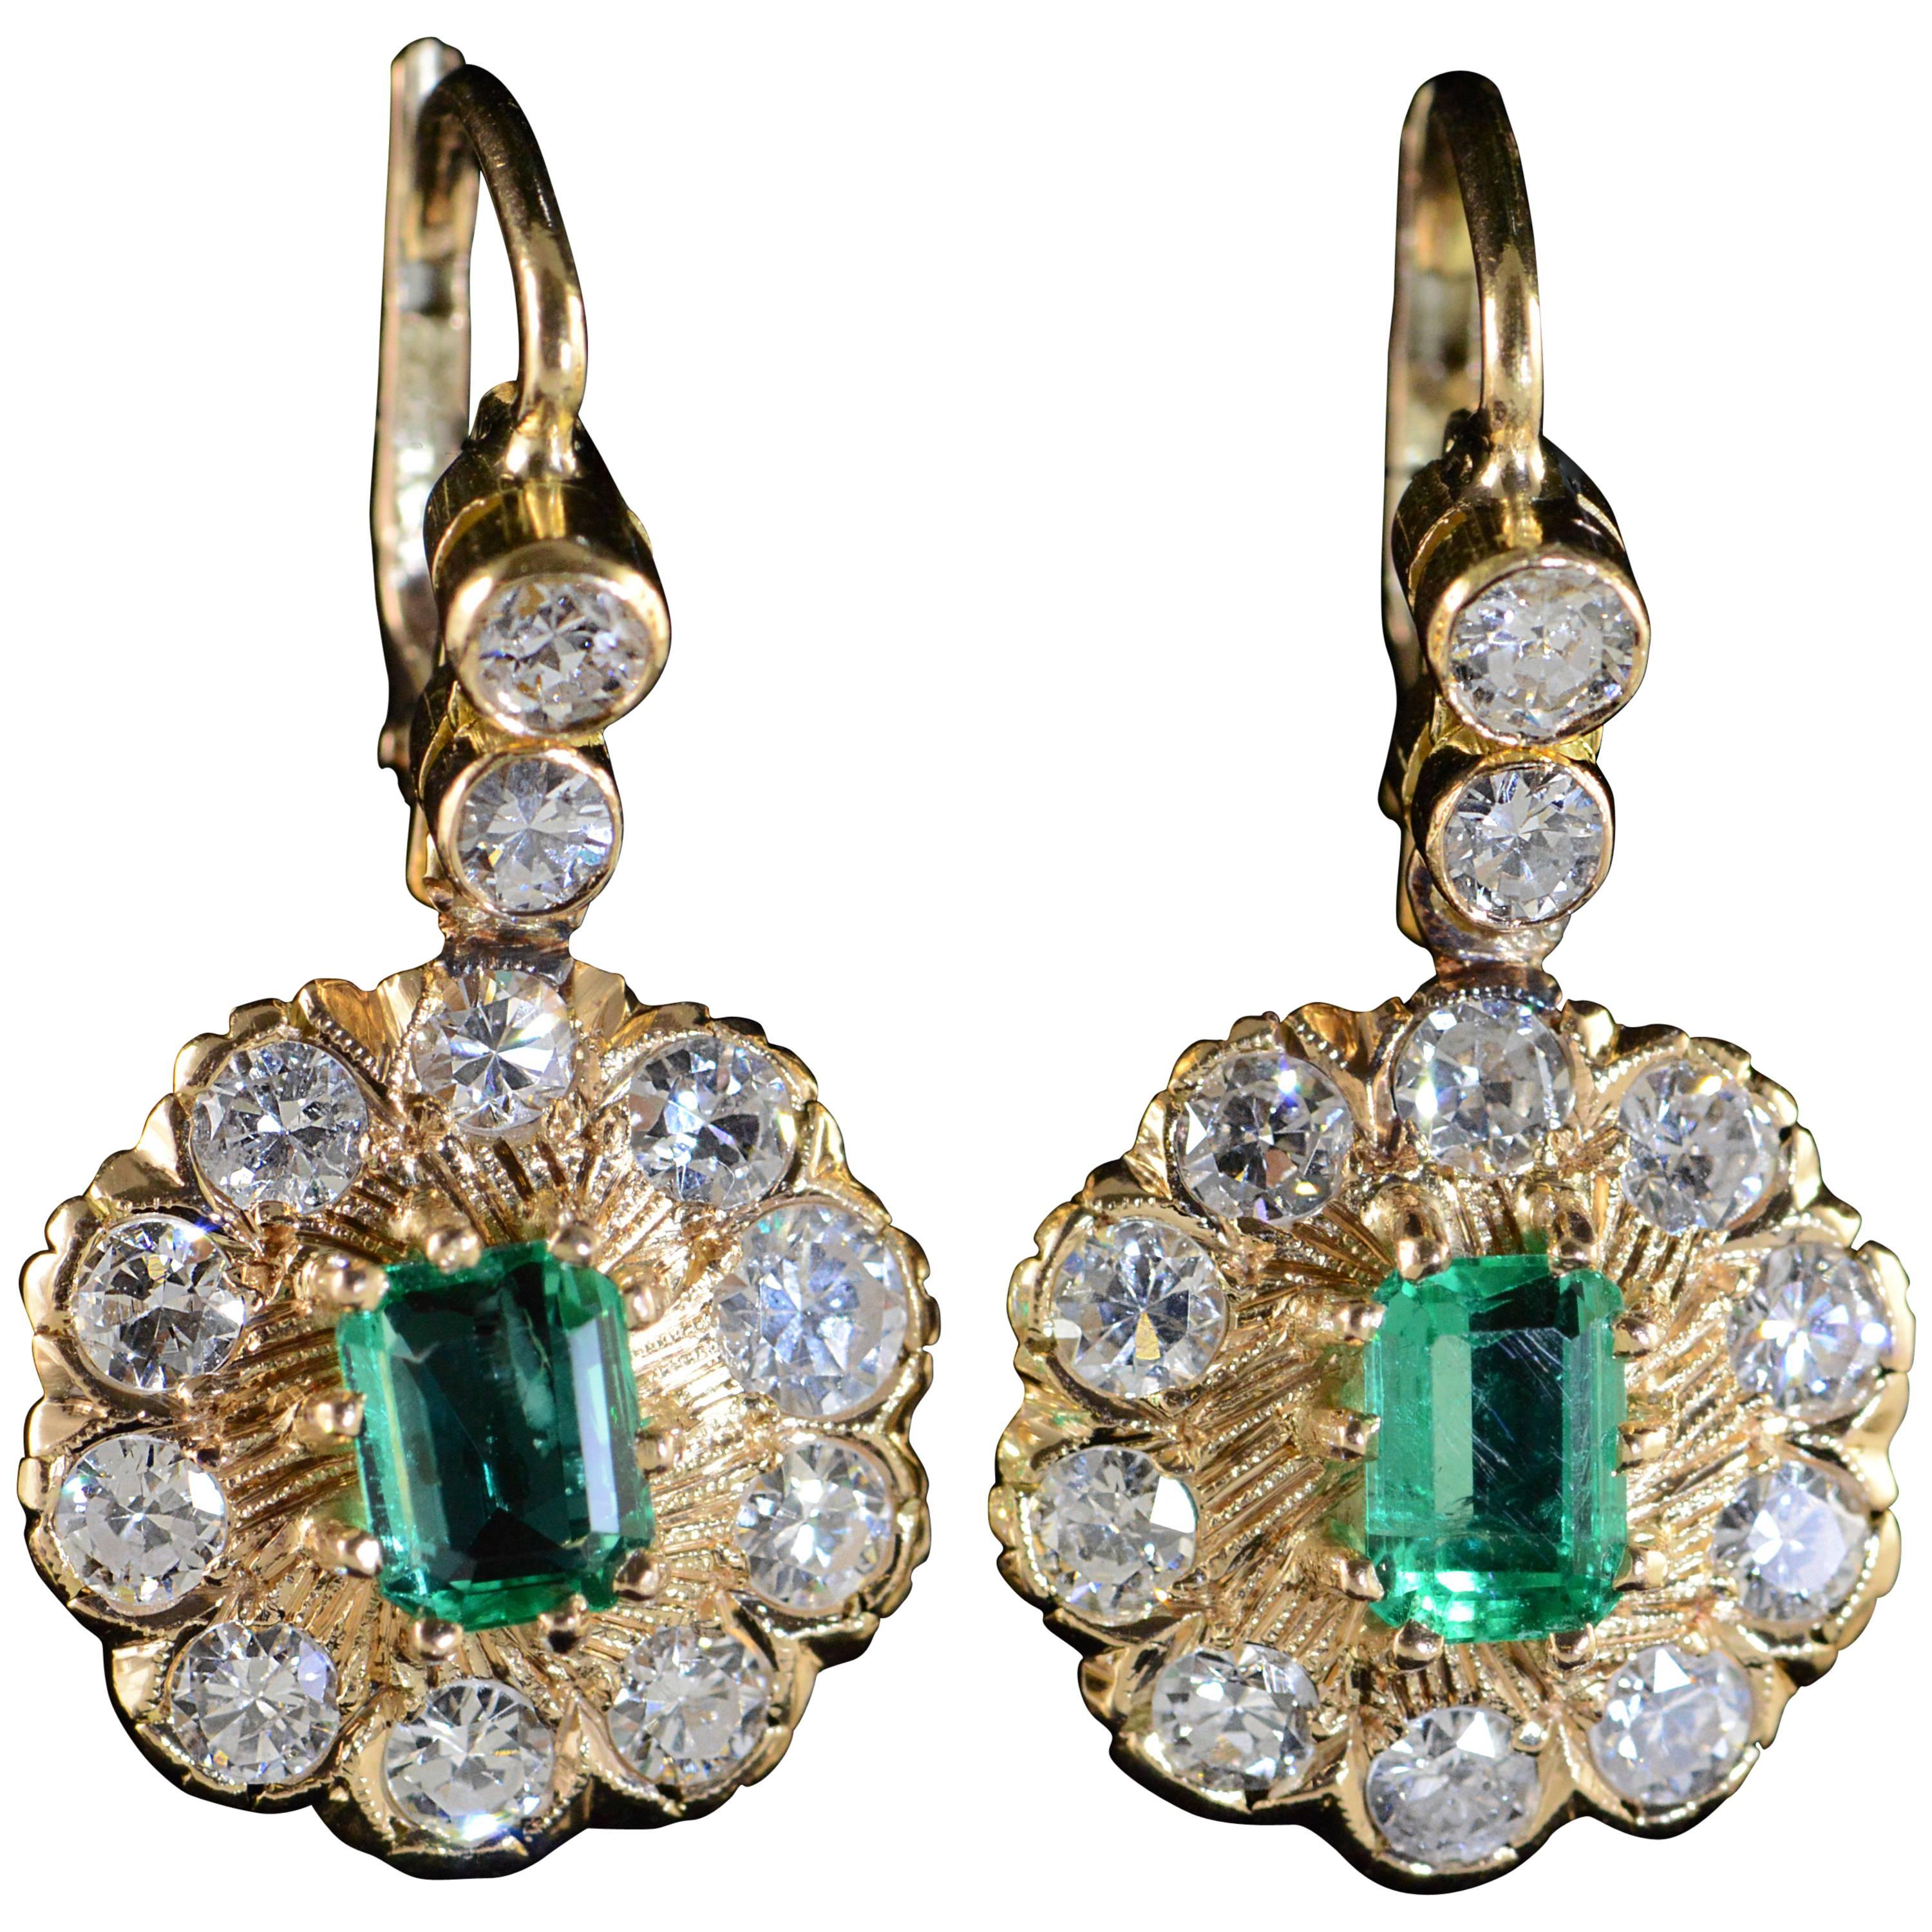  1.50 Carats Emeralds 2.80 Carats Old Mine Cut Diamonds Gold Earrings For Sale